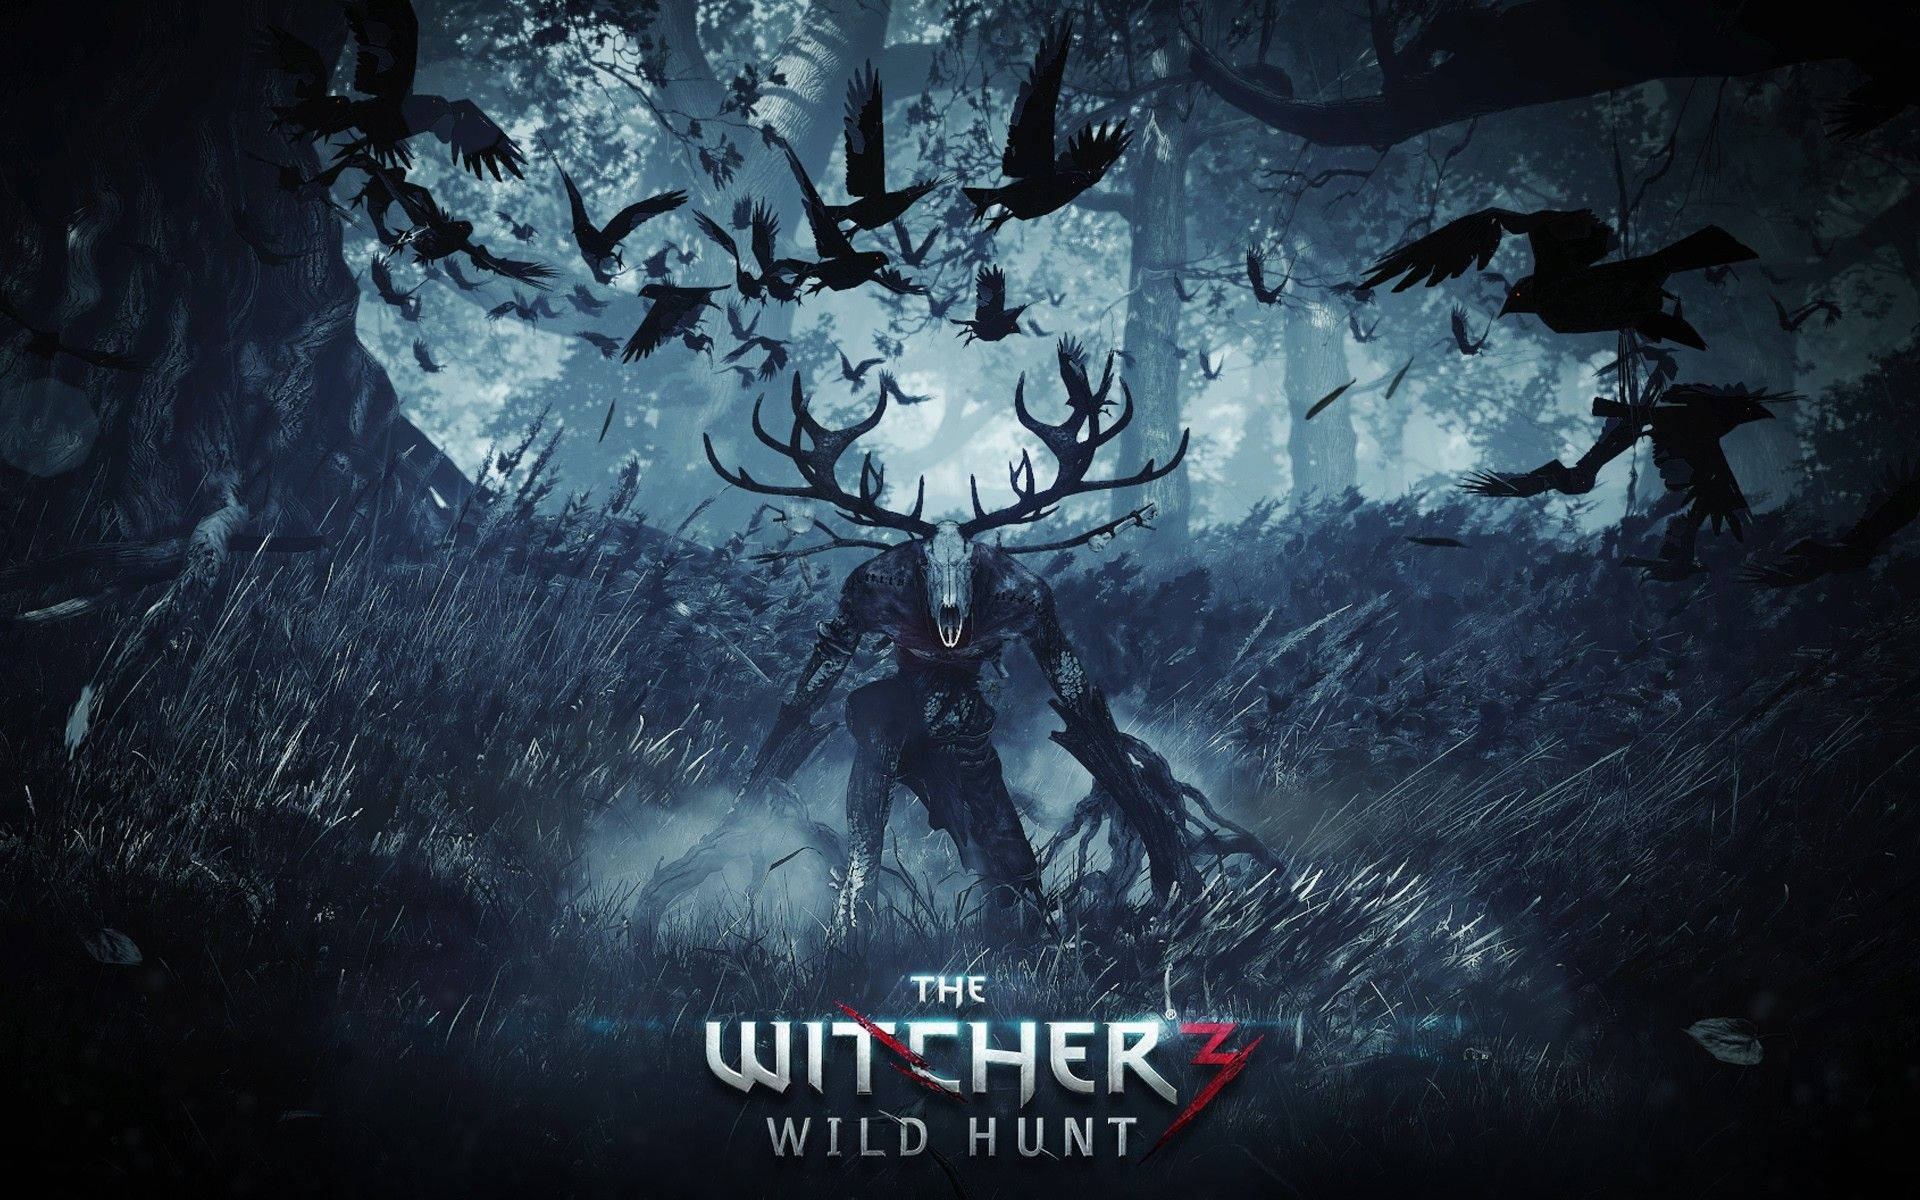 Geralt of Rivia hunts with a spectral spirit in The Witcher 3: Wild Hunt Wallpaper